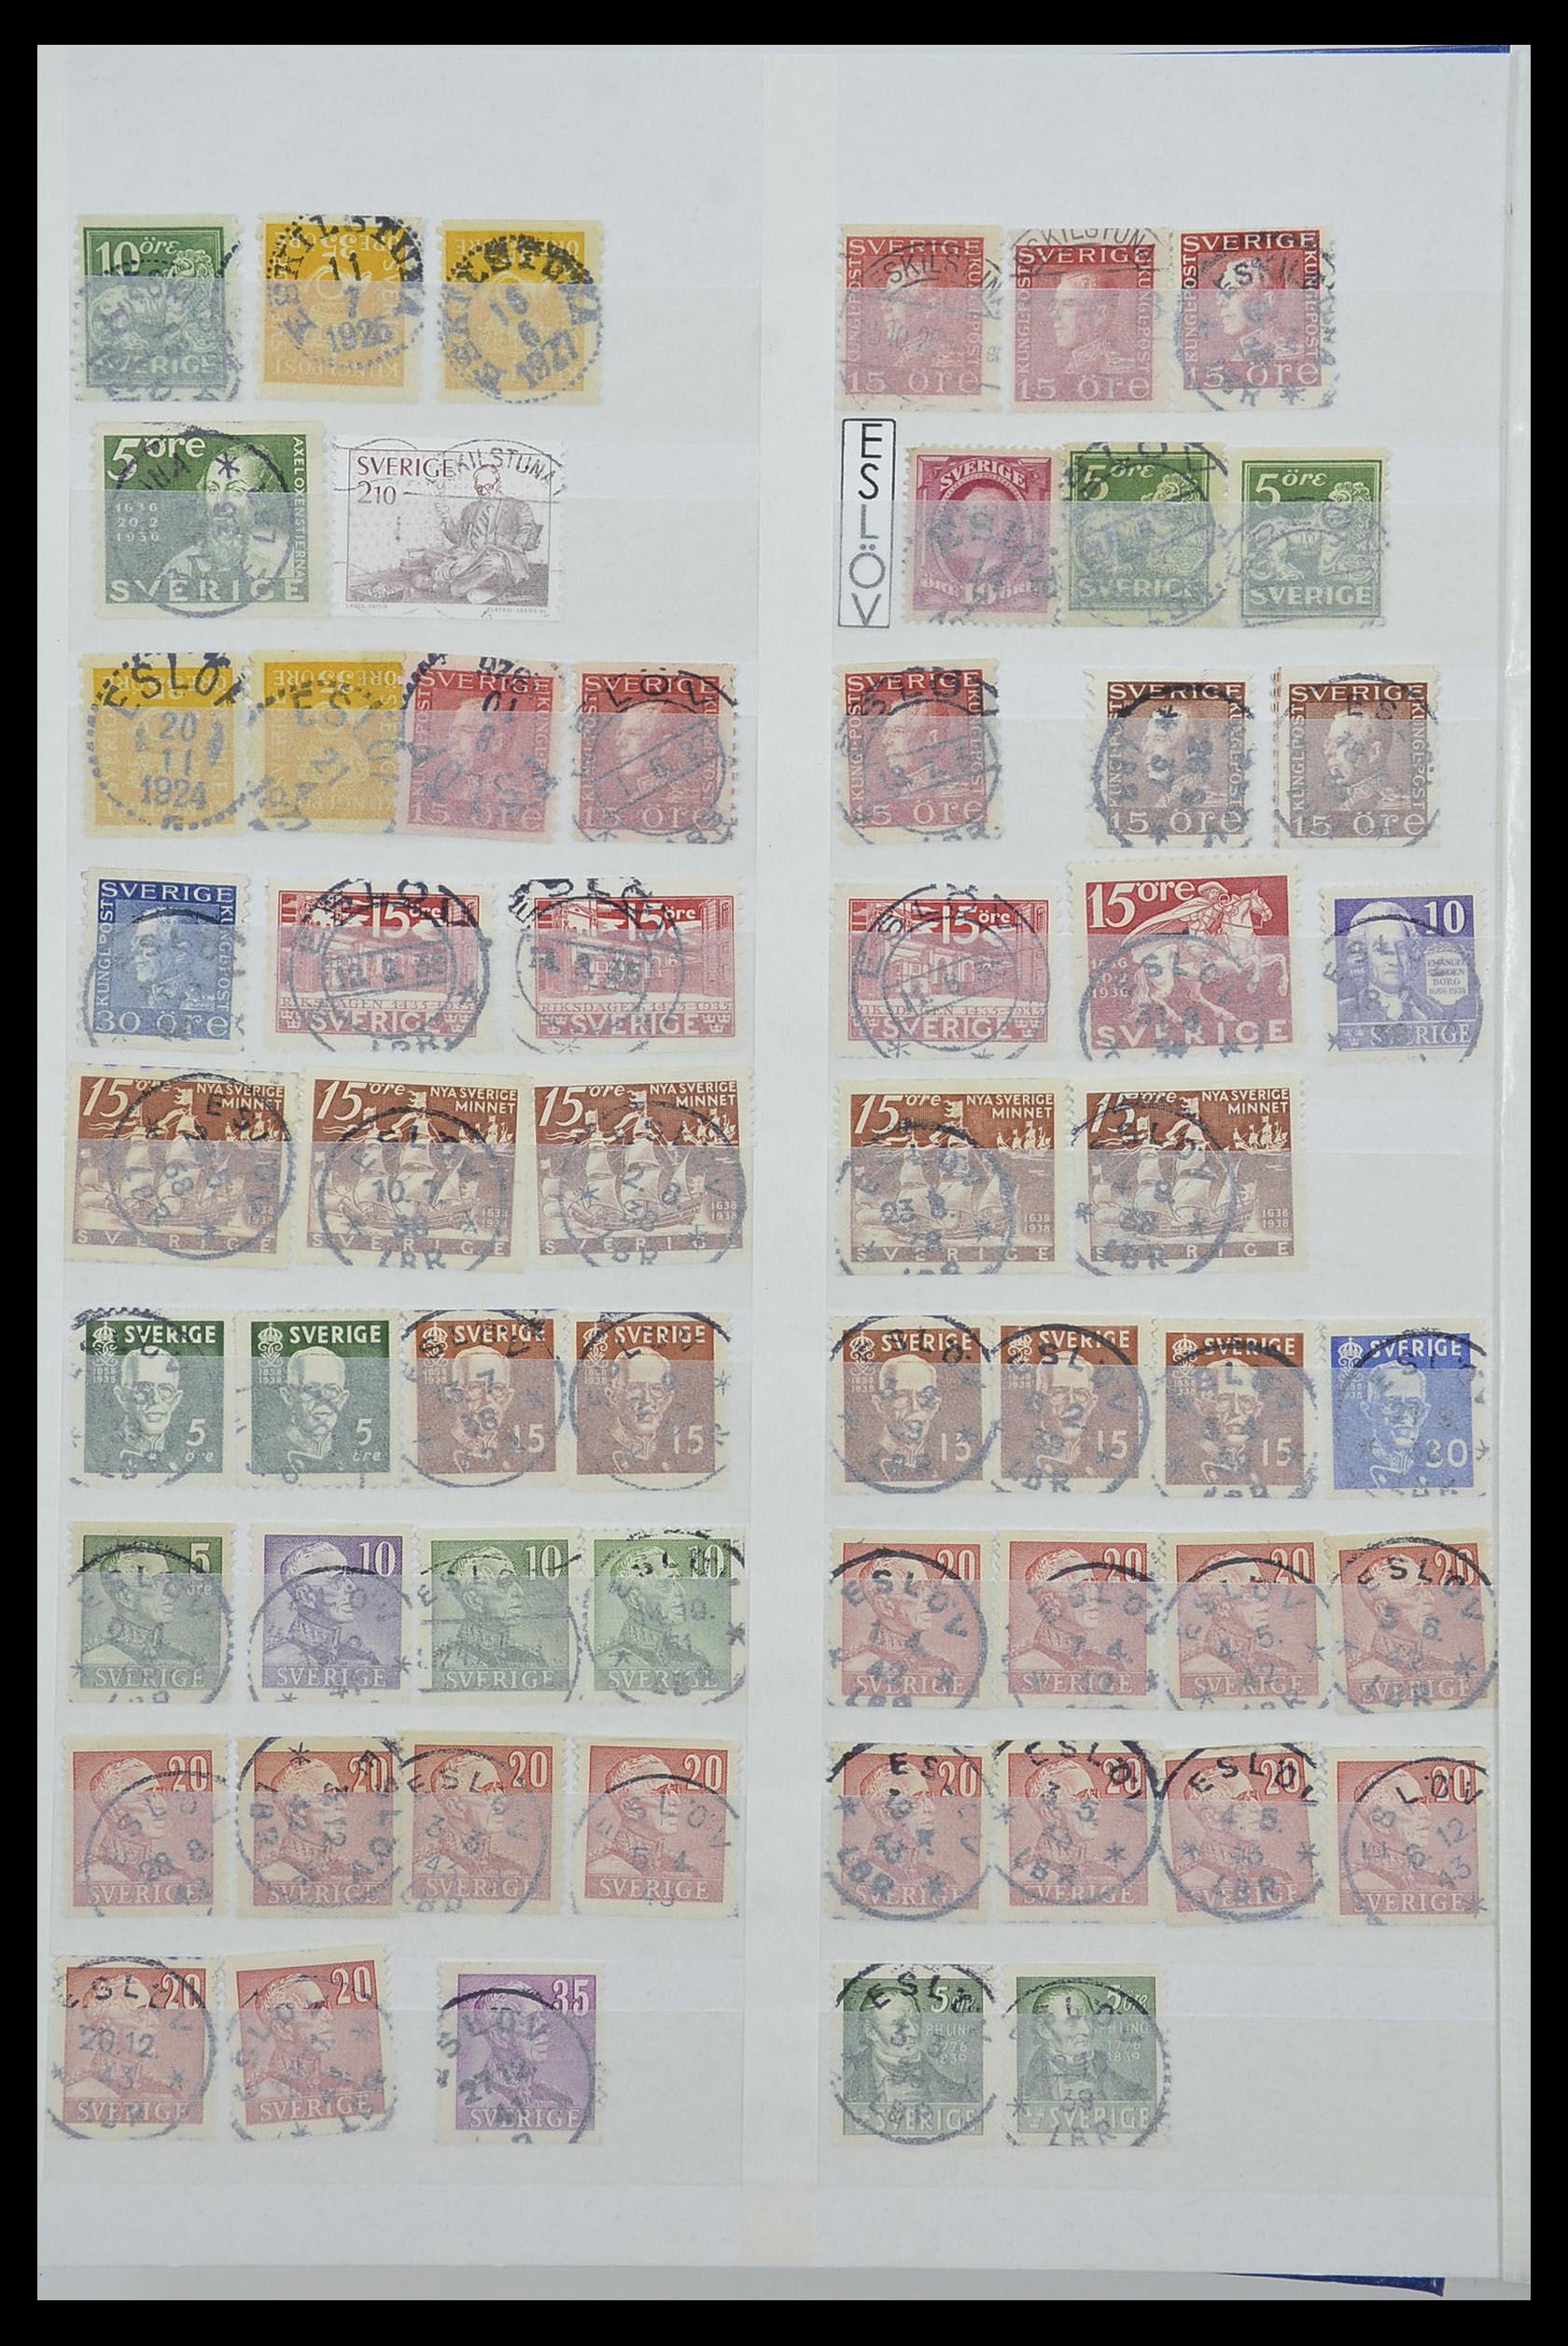 33566 010 - Stamp collection 33566 Sweden cancels from 1886.